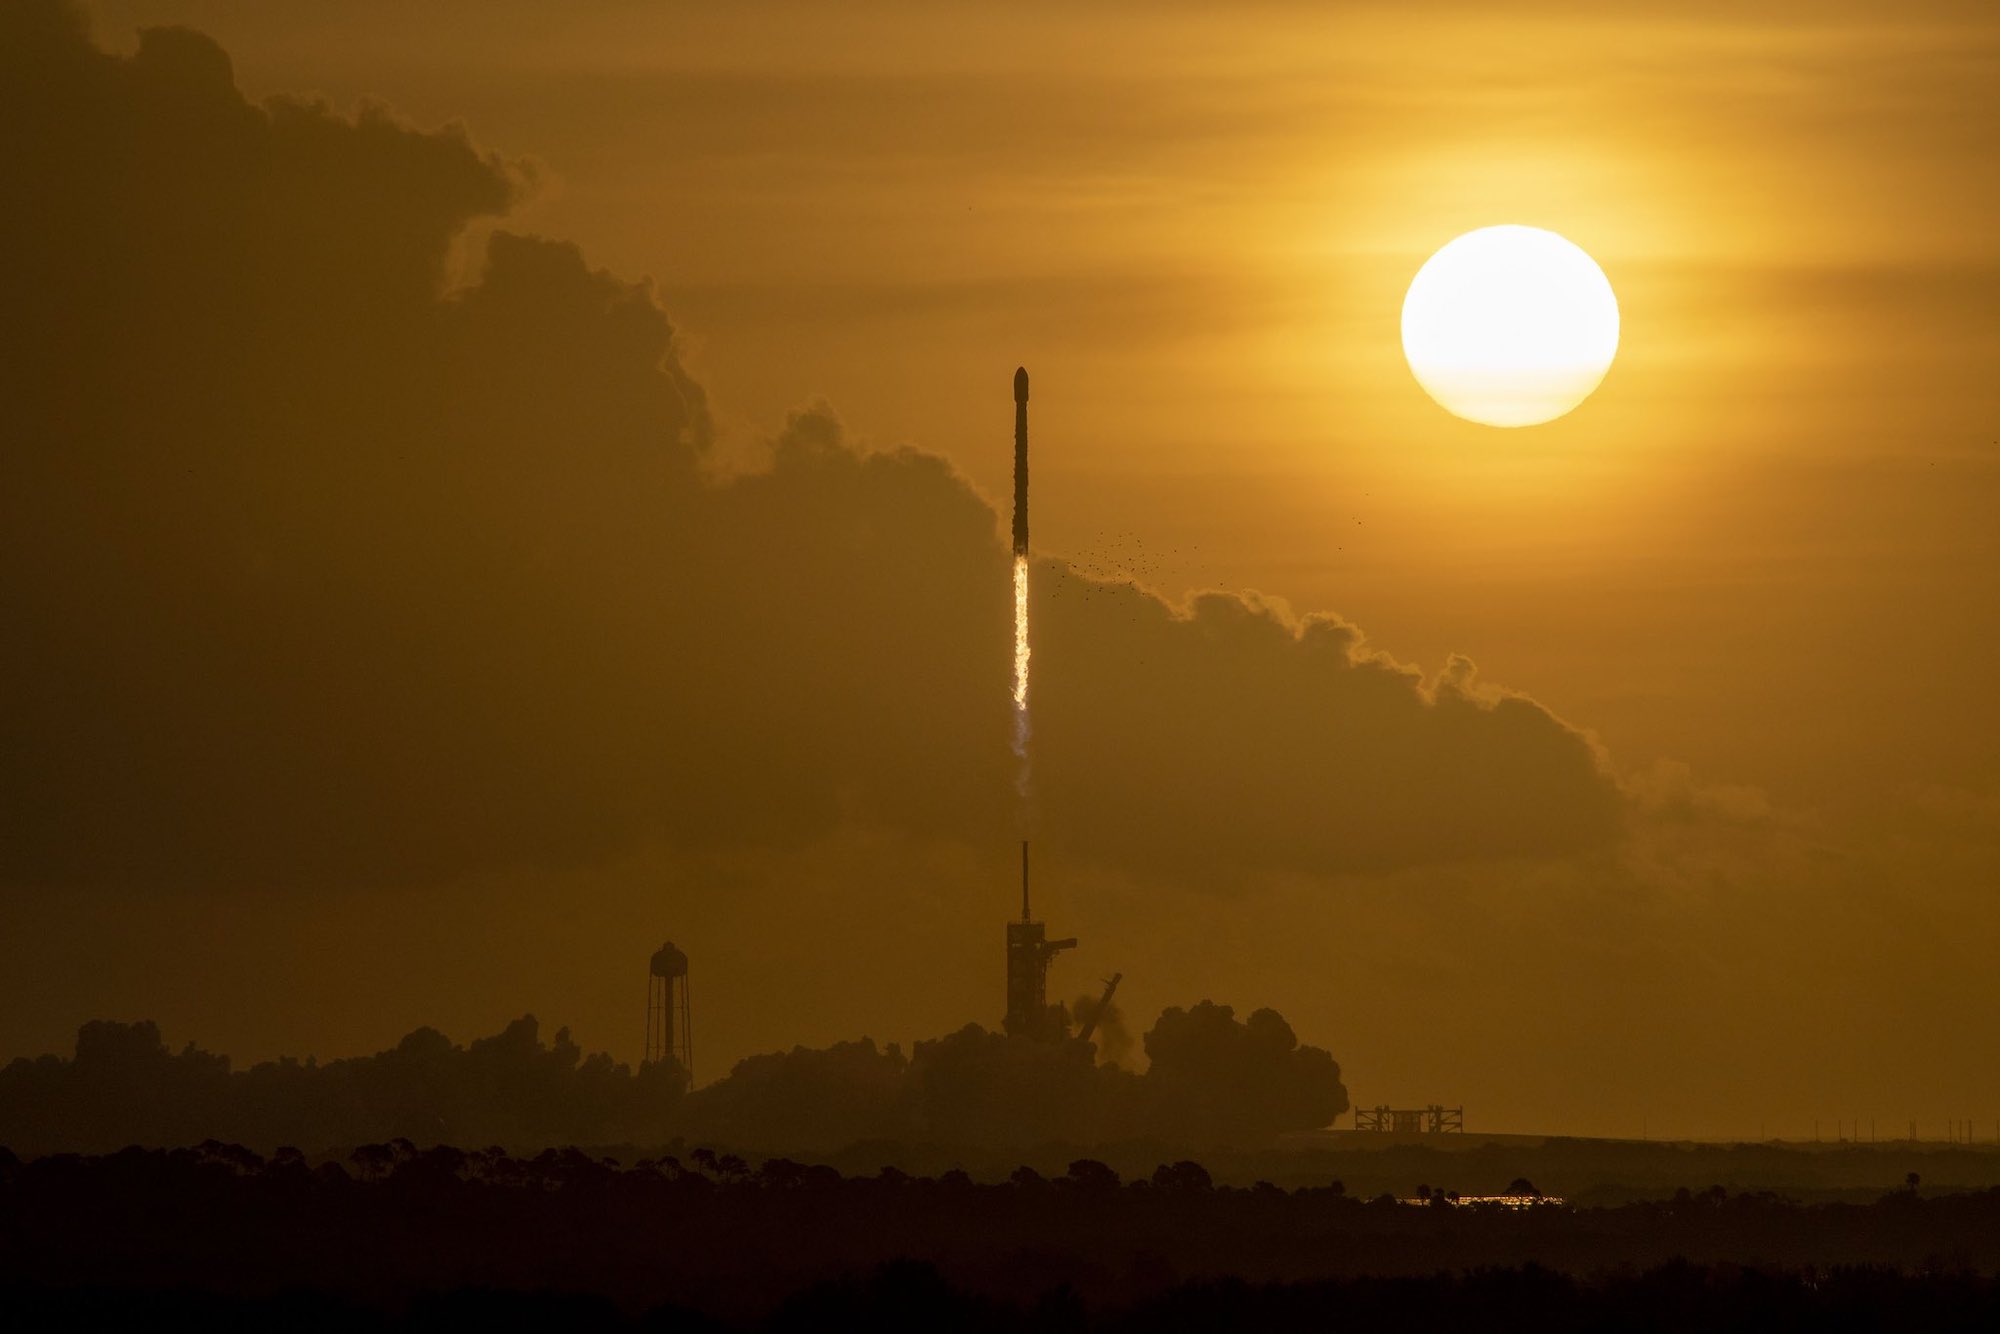 SpaceX's historic B1058 Falcon 9 booster during one of its 19 flights.